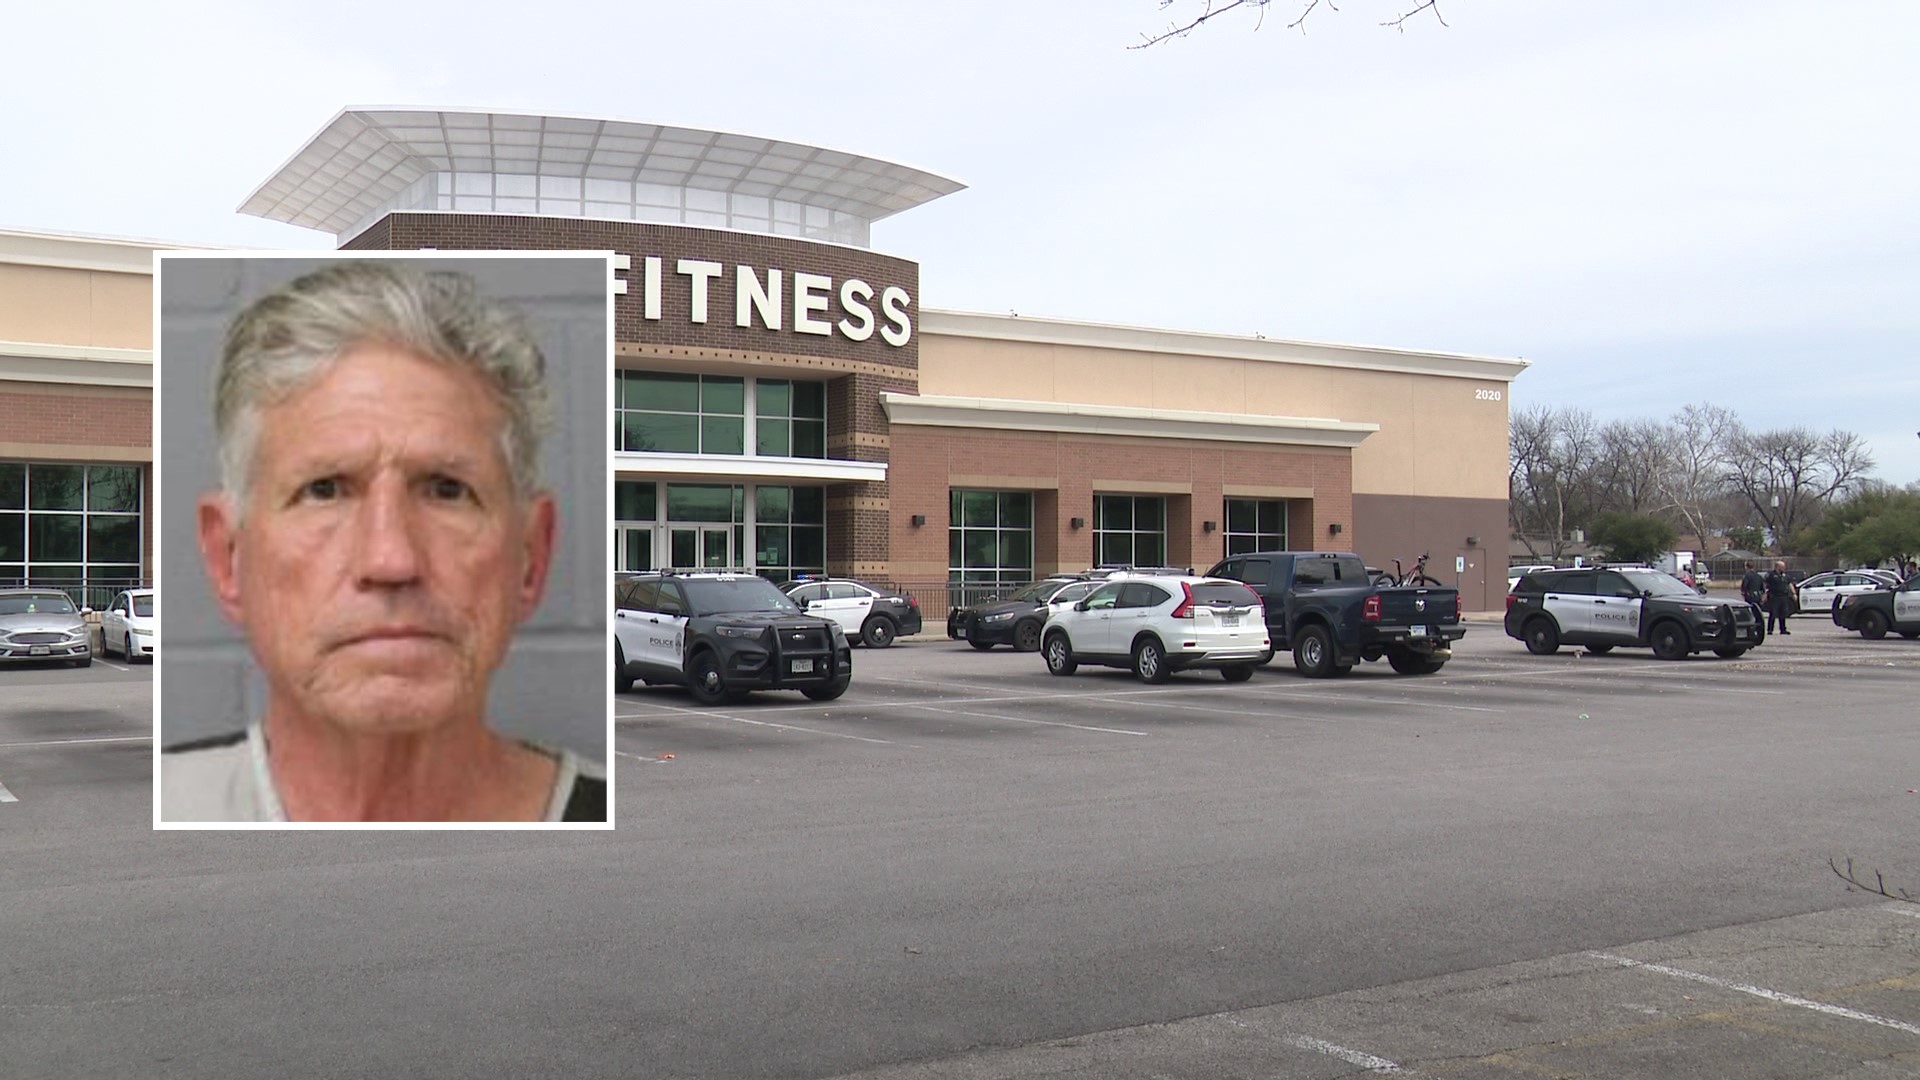 We're learning more about what led up to a stabbing at a gym in North Austin last week. Police arrested John Makinson over the incident.